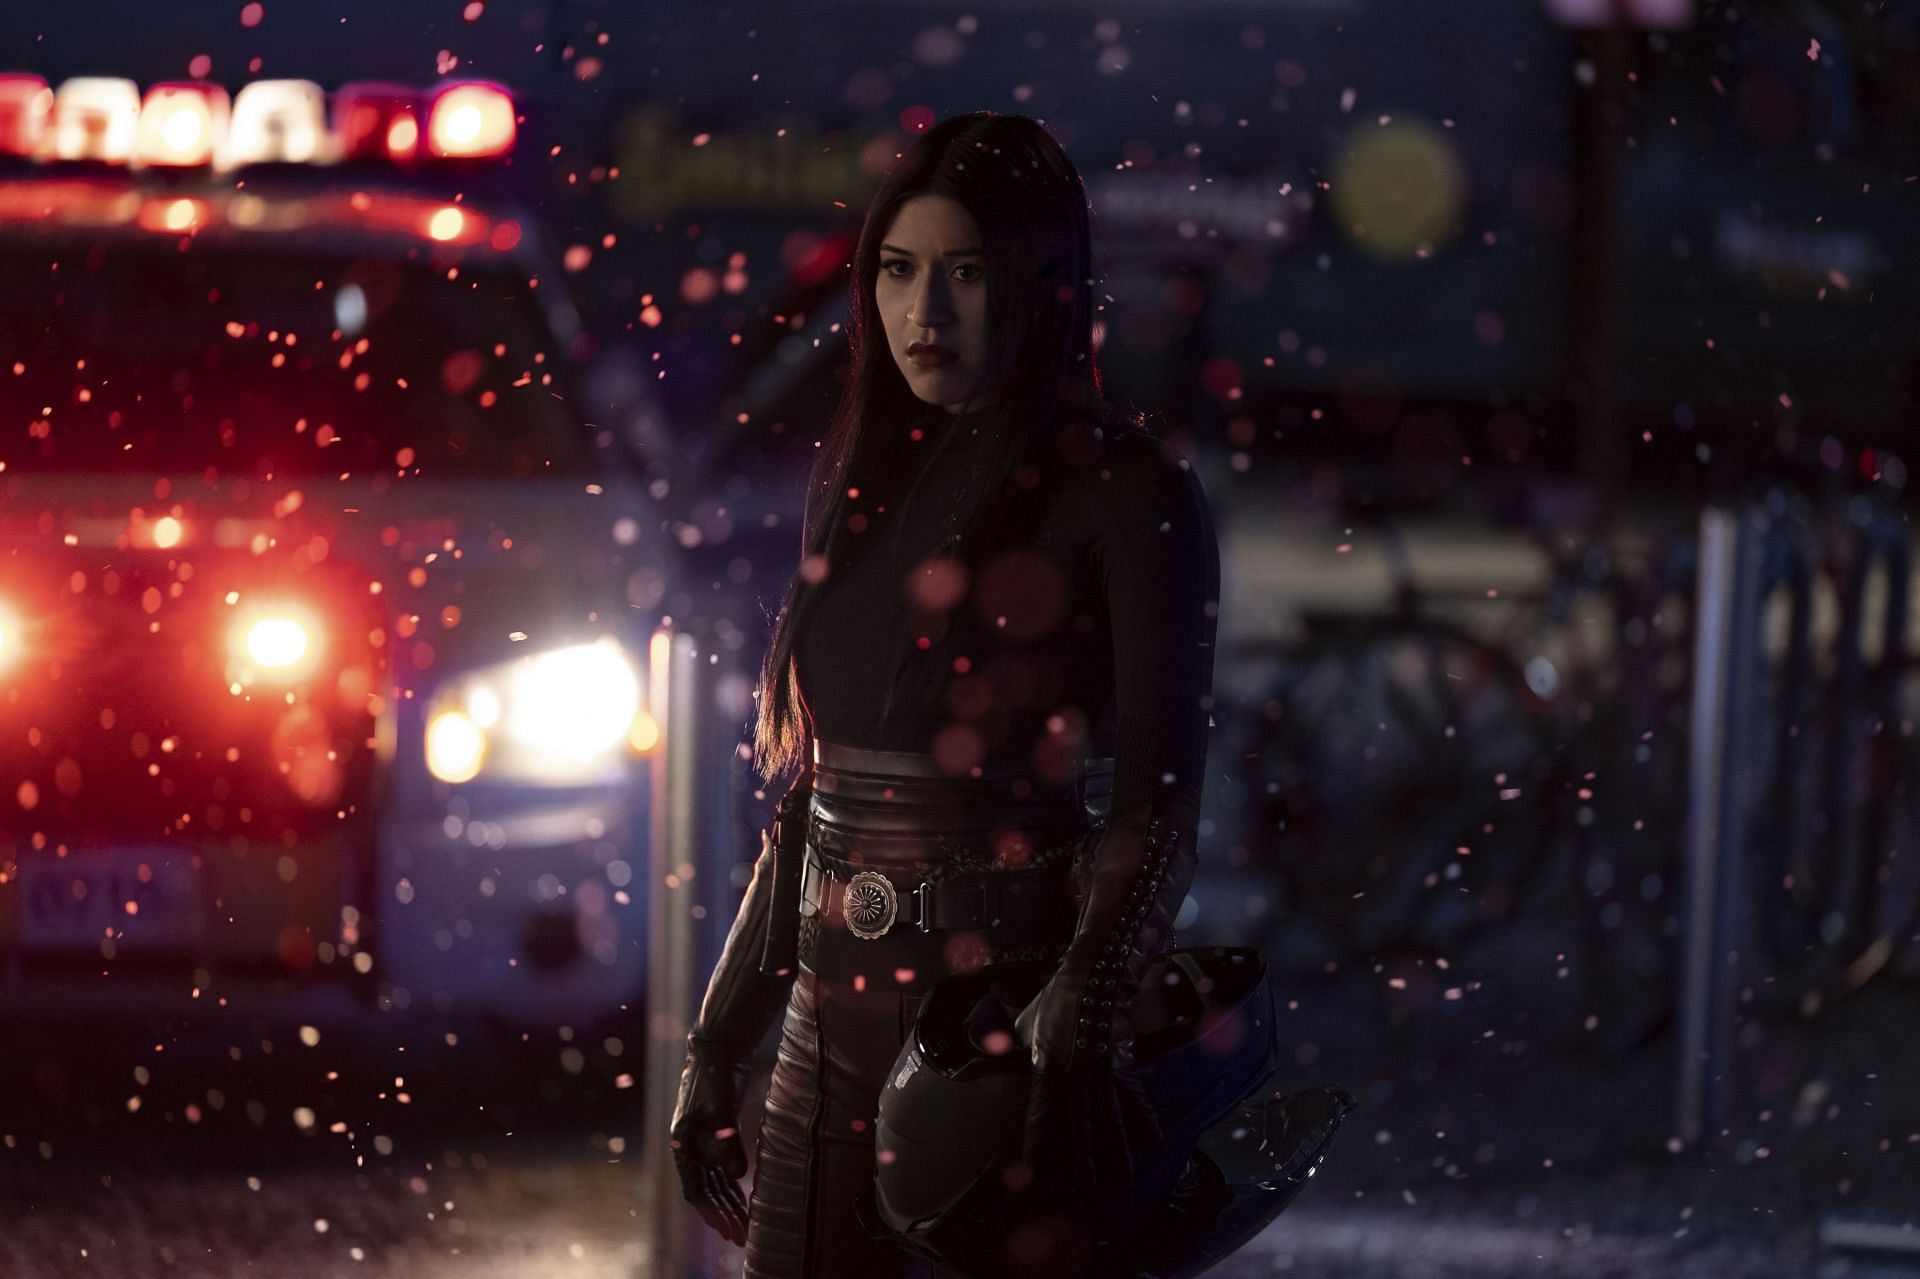 Alaqua Cox stars as the deaf Native American superhero Maya Lopez in Echo, with all episodes set to premiere at once on Disney+ (Image via Marvel Studios)